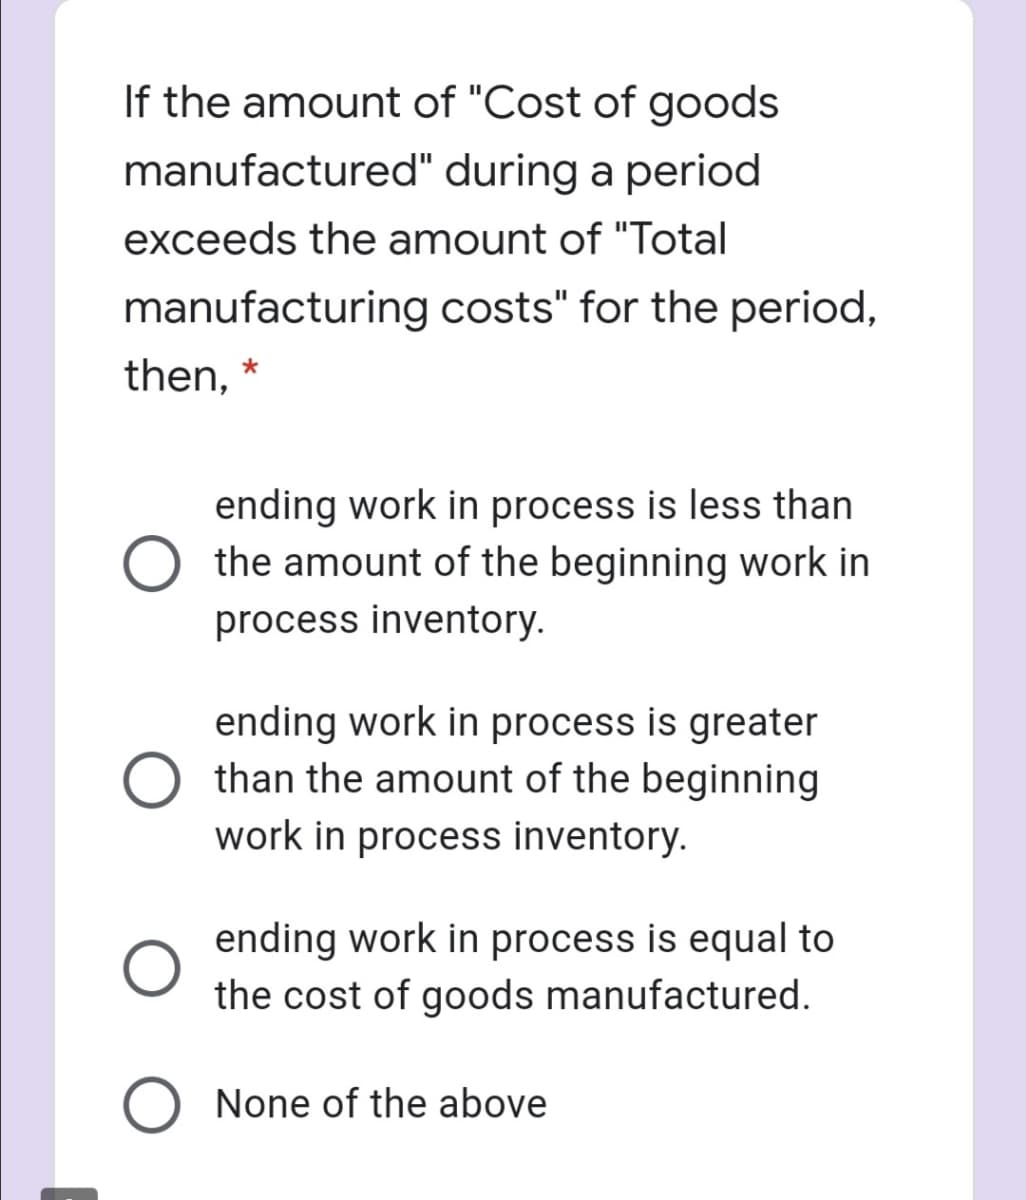 If the amount of "Cost of goods
manufactured" during a period
exceeds the amount of "Total
manufacturing costs" for the period,
then,
ending work in process is less than
the amount of the beginning work in
process inventory.
ending work in process is greater
than the amount of the beginning
work in process inventory.
ending work in process is equal to
the cost of goods manufactured.
None of the above
